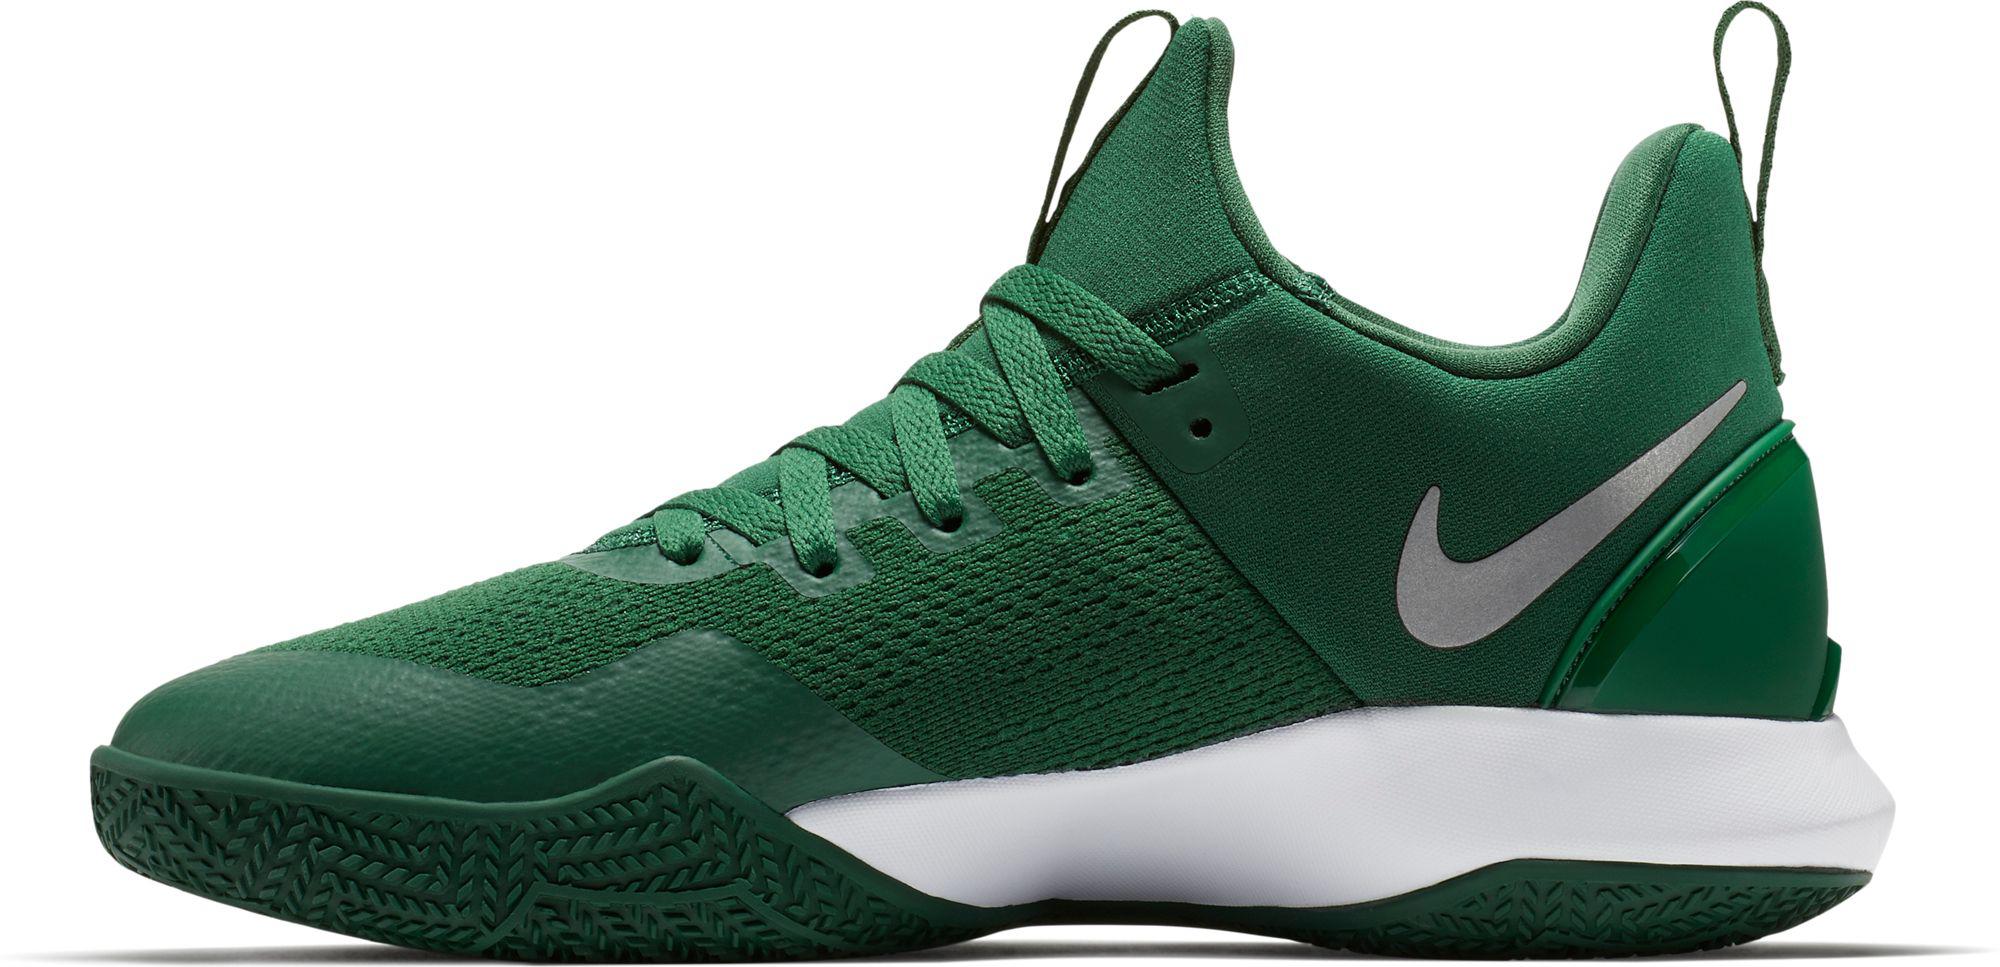 Lyst - Nike Zoom Shift Tb Basketball Shoes in Green for Men